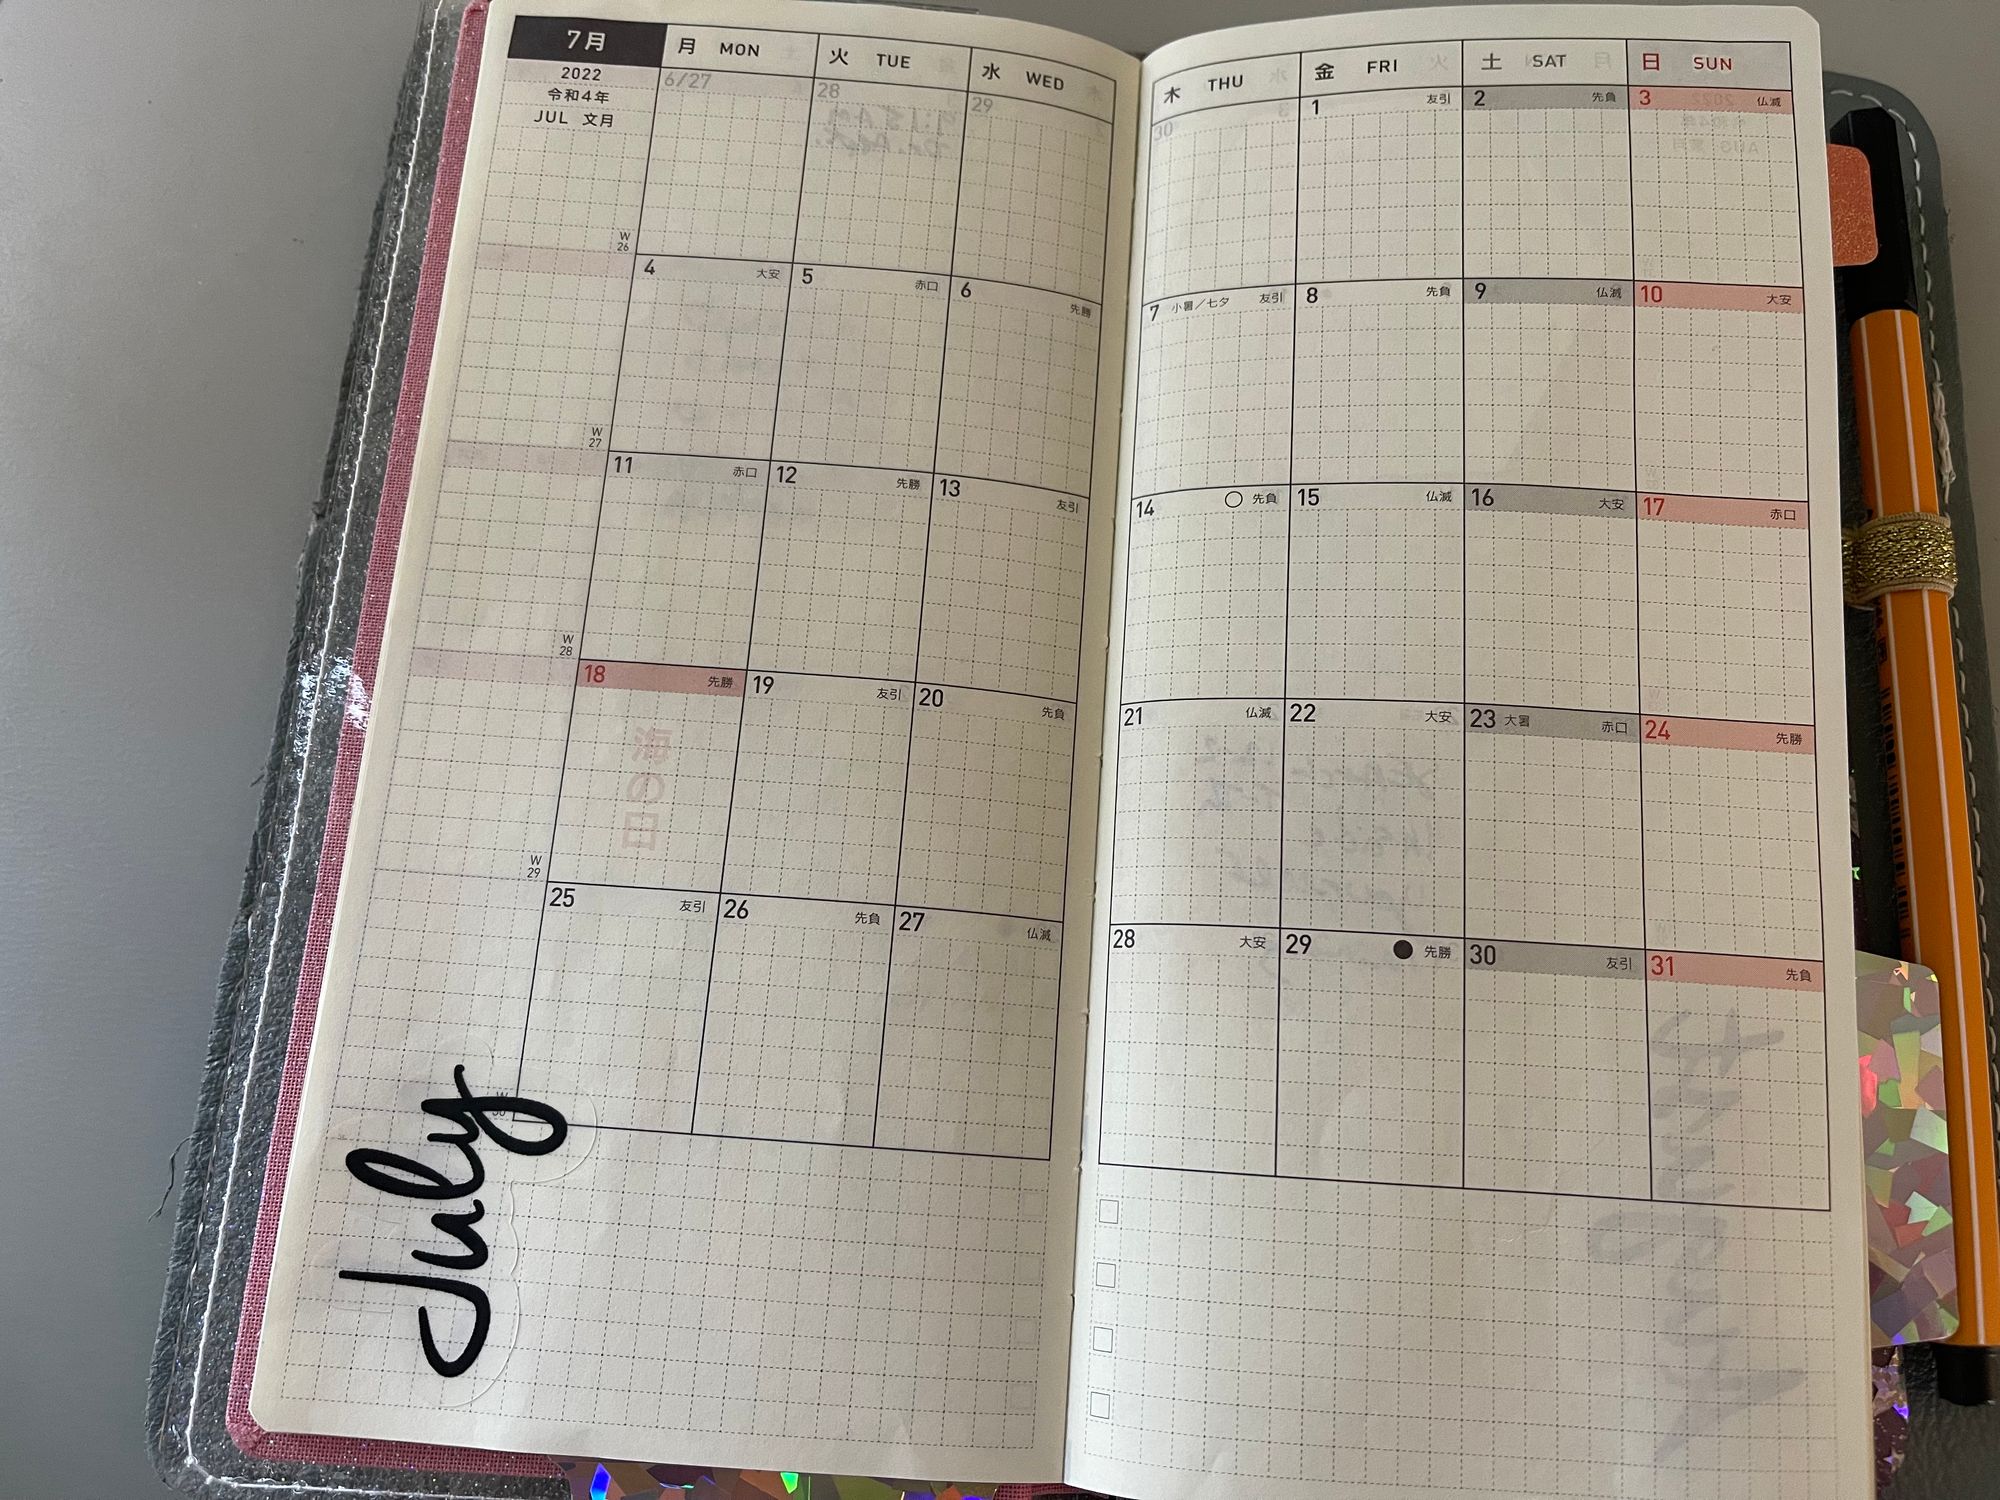 Months of the Year Download for Hobonichi Weeks